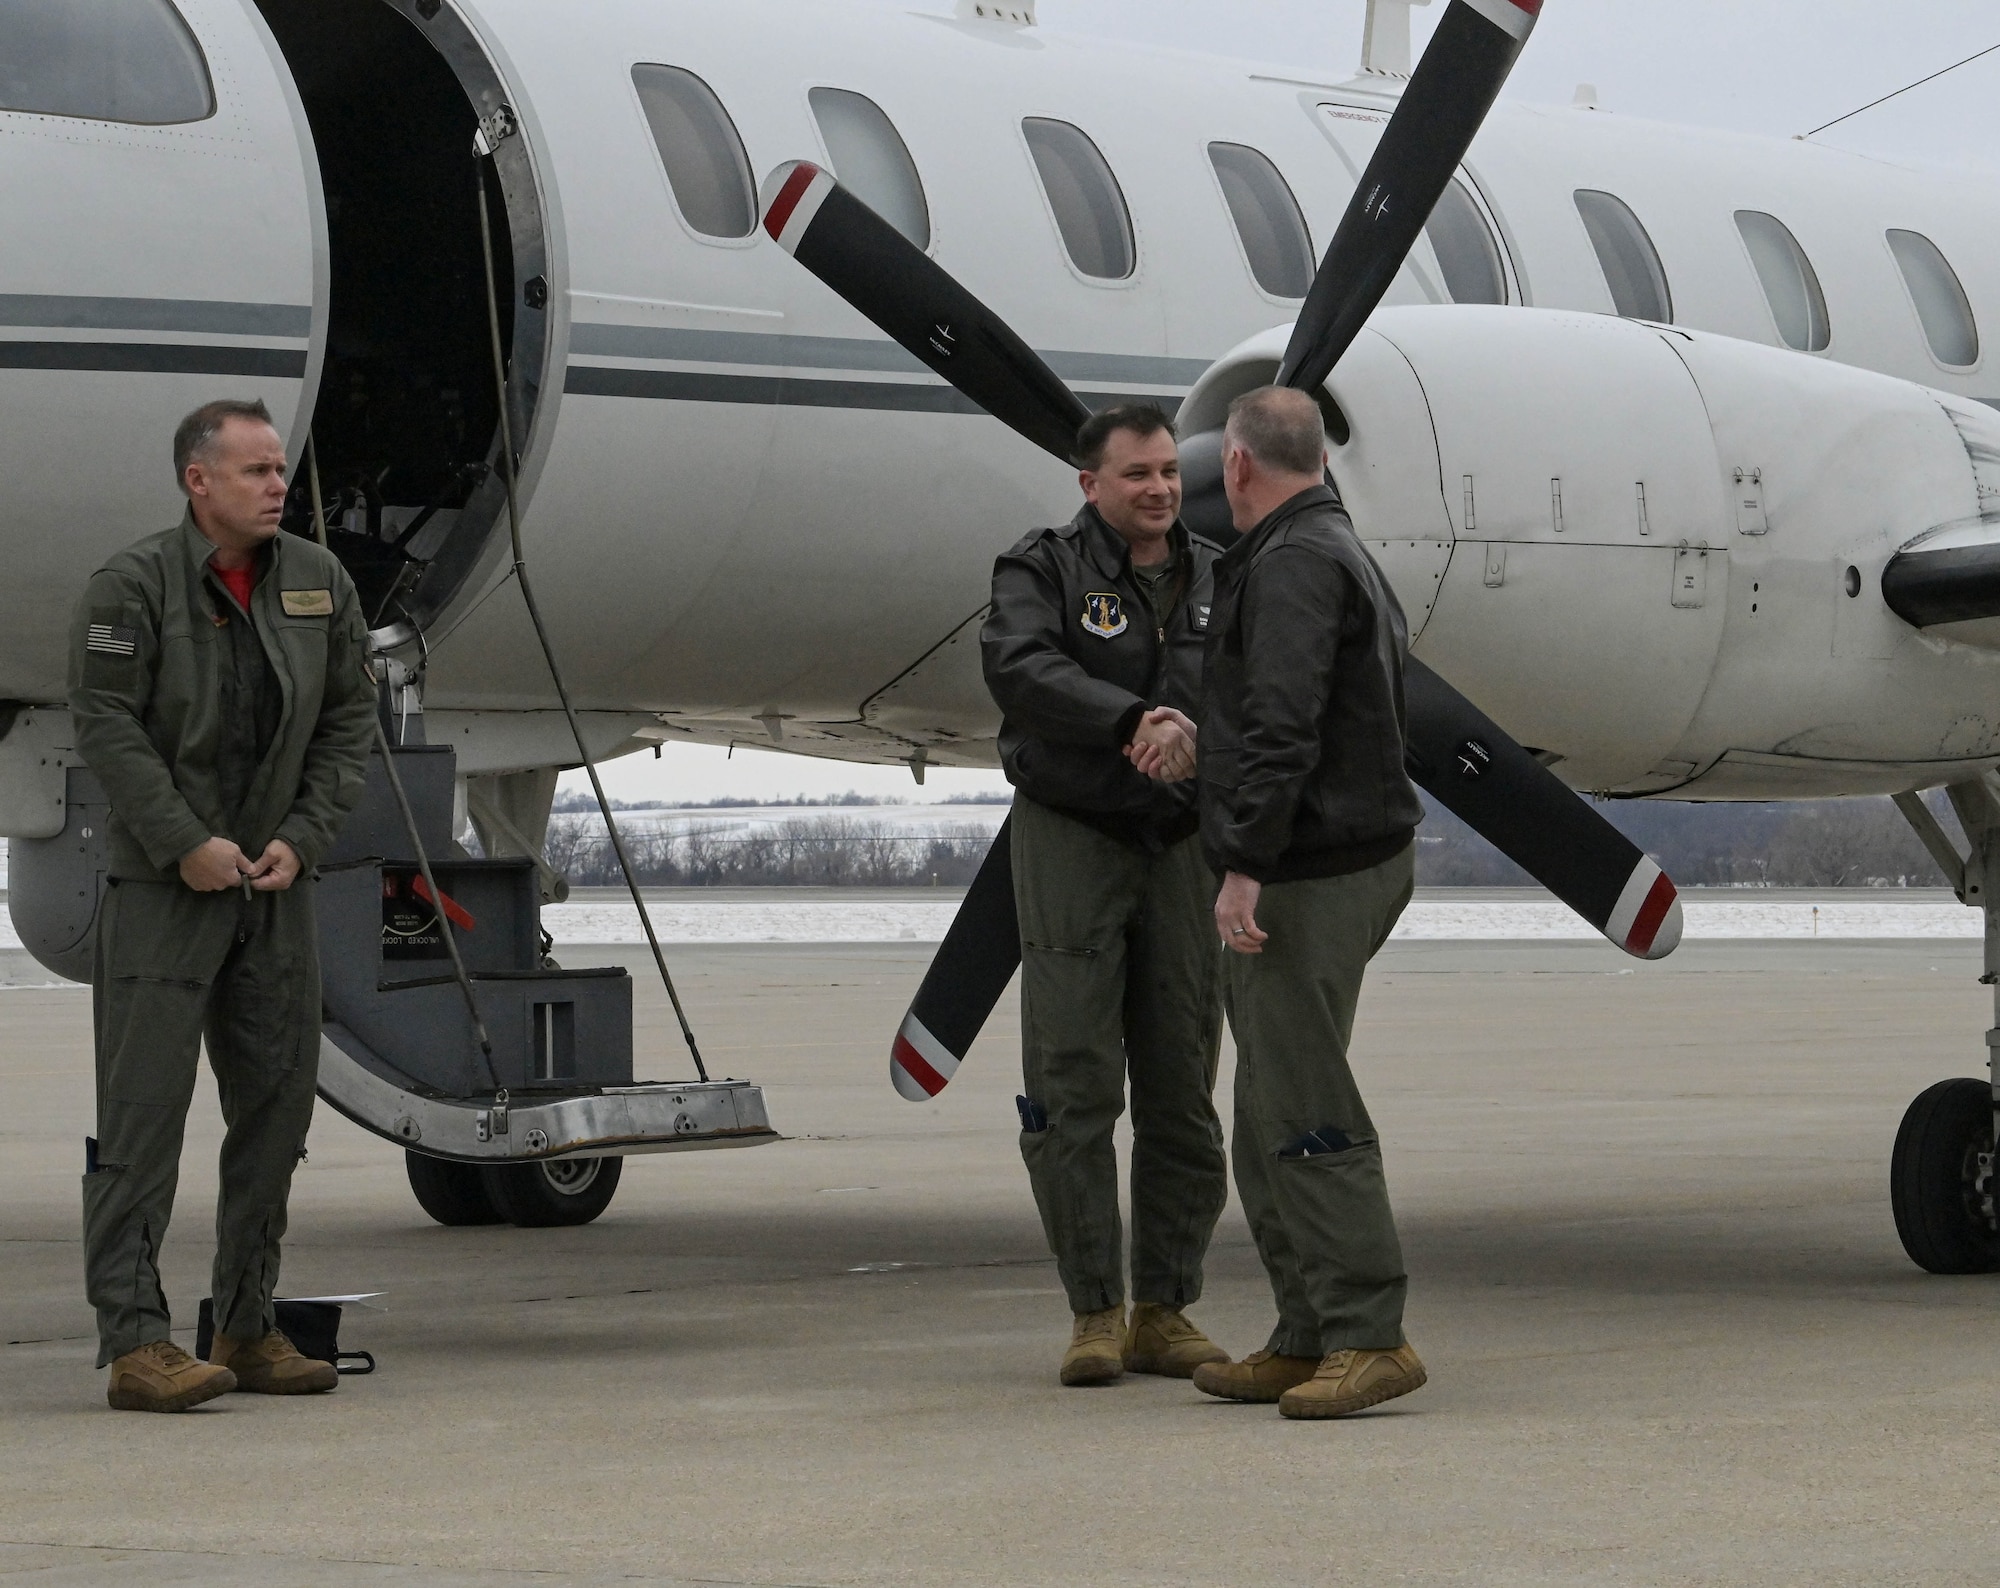 Col. Travis Crawmer (right), 132d Wing commander, congratulates the crew of the RC-26 Condor upon completing the final mission at the 132d Wing, January 27, 2023, in Des Moines, Iowa. The RC-26 Condor operated at the Des Moines Airbase since 2015 and provided counter-narcotics and domestic natural disaster support for law enforcement and emergency management. (U.S. Air National Guard photo by Senior Master Sgt. Robert Shepherd)